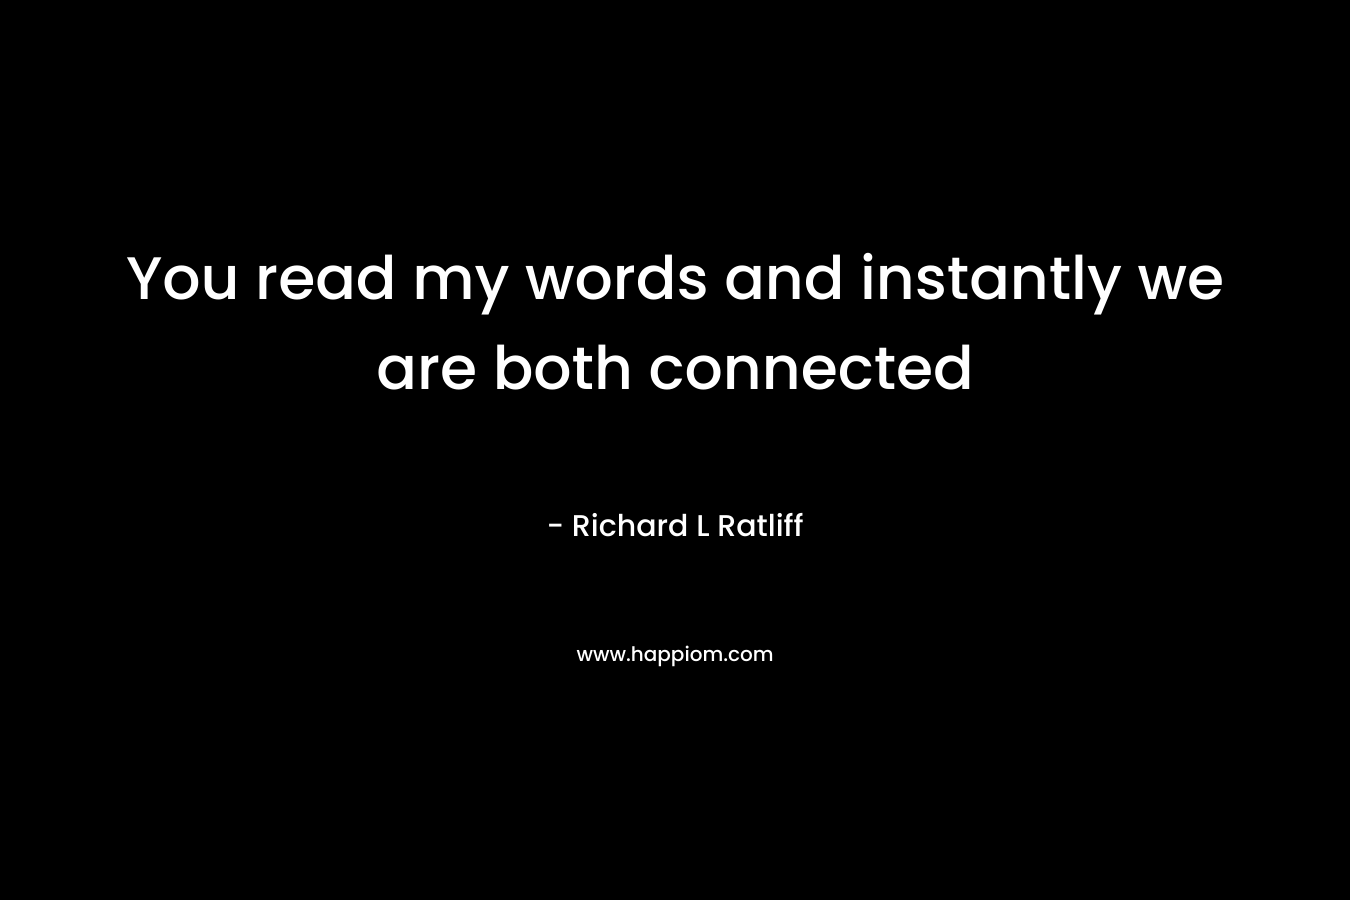 You read my words and instantly we are both connected